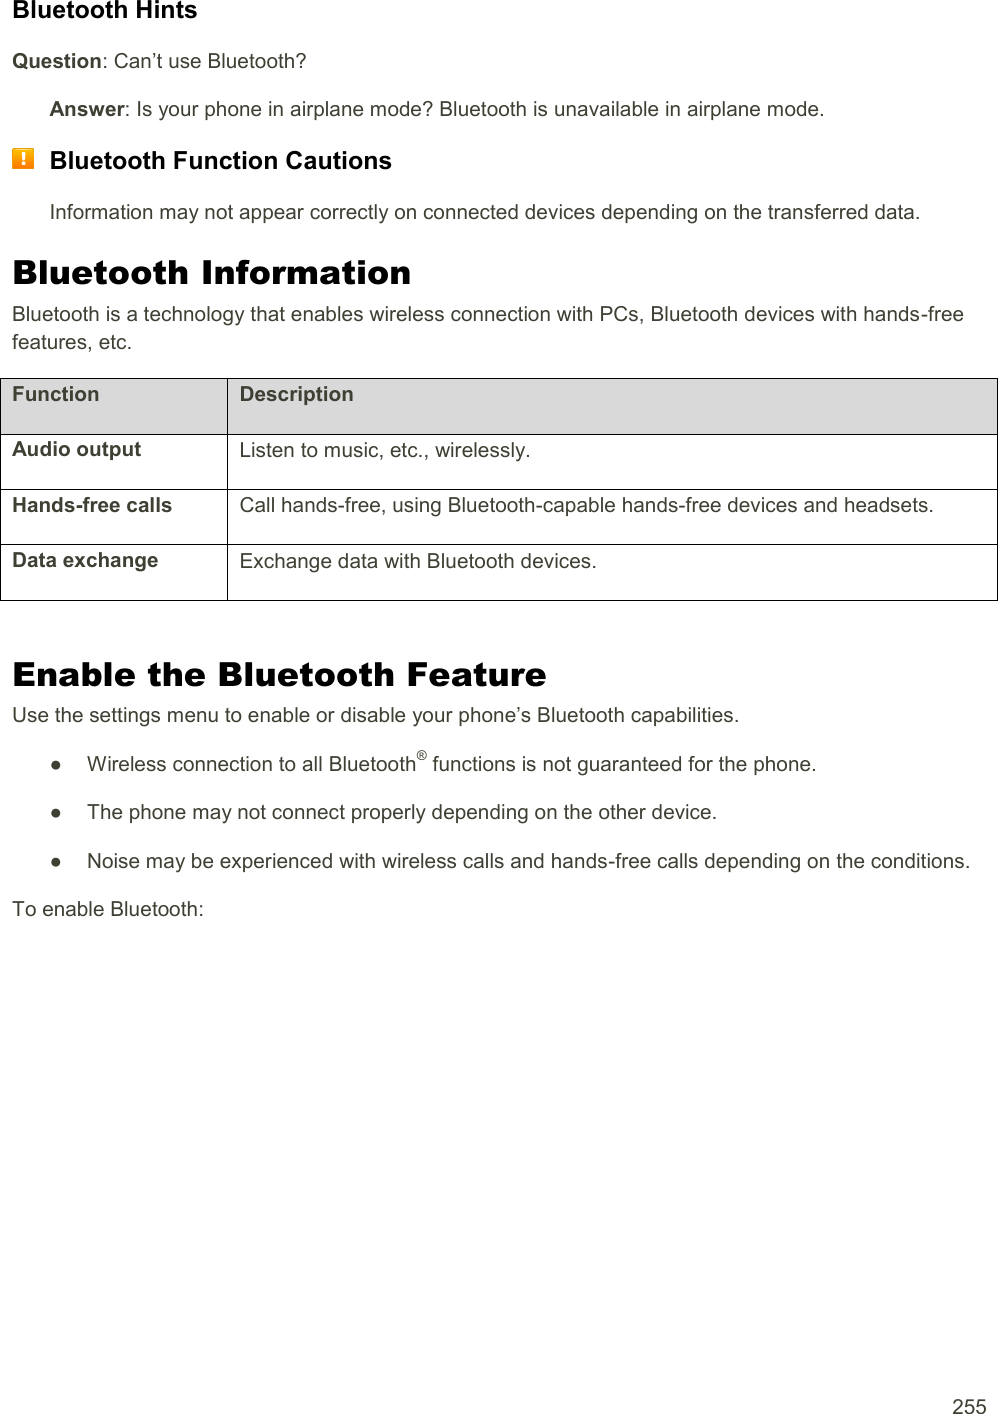  255 Bluetooth Hints Question: Can’t use Bluetooth? Answer: Is your phone in airplane mode? Bluetooth is unavailable in airplane mode.  Bluetooth Function Cautions Information may not appear correctly on connected devices depending on the transferred data. Bluetooth Information Bluetooth is a technology that enables wireless connection with PCs, Bluetooth devices with hands-free features, etc. Function Description Audio output Listen to music, etc., wirelessly. Hands-free calls Call hands-free, using Bluetooth-capable hands-free devices and headsets. Data exchange Exchange data with Bluetooth devices.  Enable the Bluetooth Feature Use the settings menu to enable or disable your phone’s Bluetooth capabilities. ●  Wireless connection to all Bluetooth® functions is not guaranteed for the phone. ●  The phone may not connect properly depending on the other device. ●  Noise may be experienced with wireless calls and hands-free calls depending on the conditions. To enable Bluetooth: 